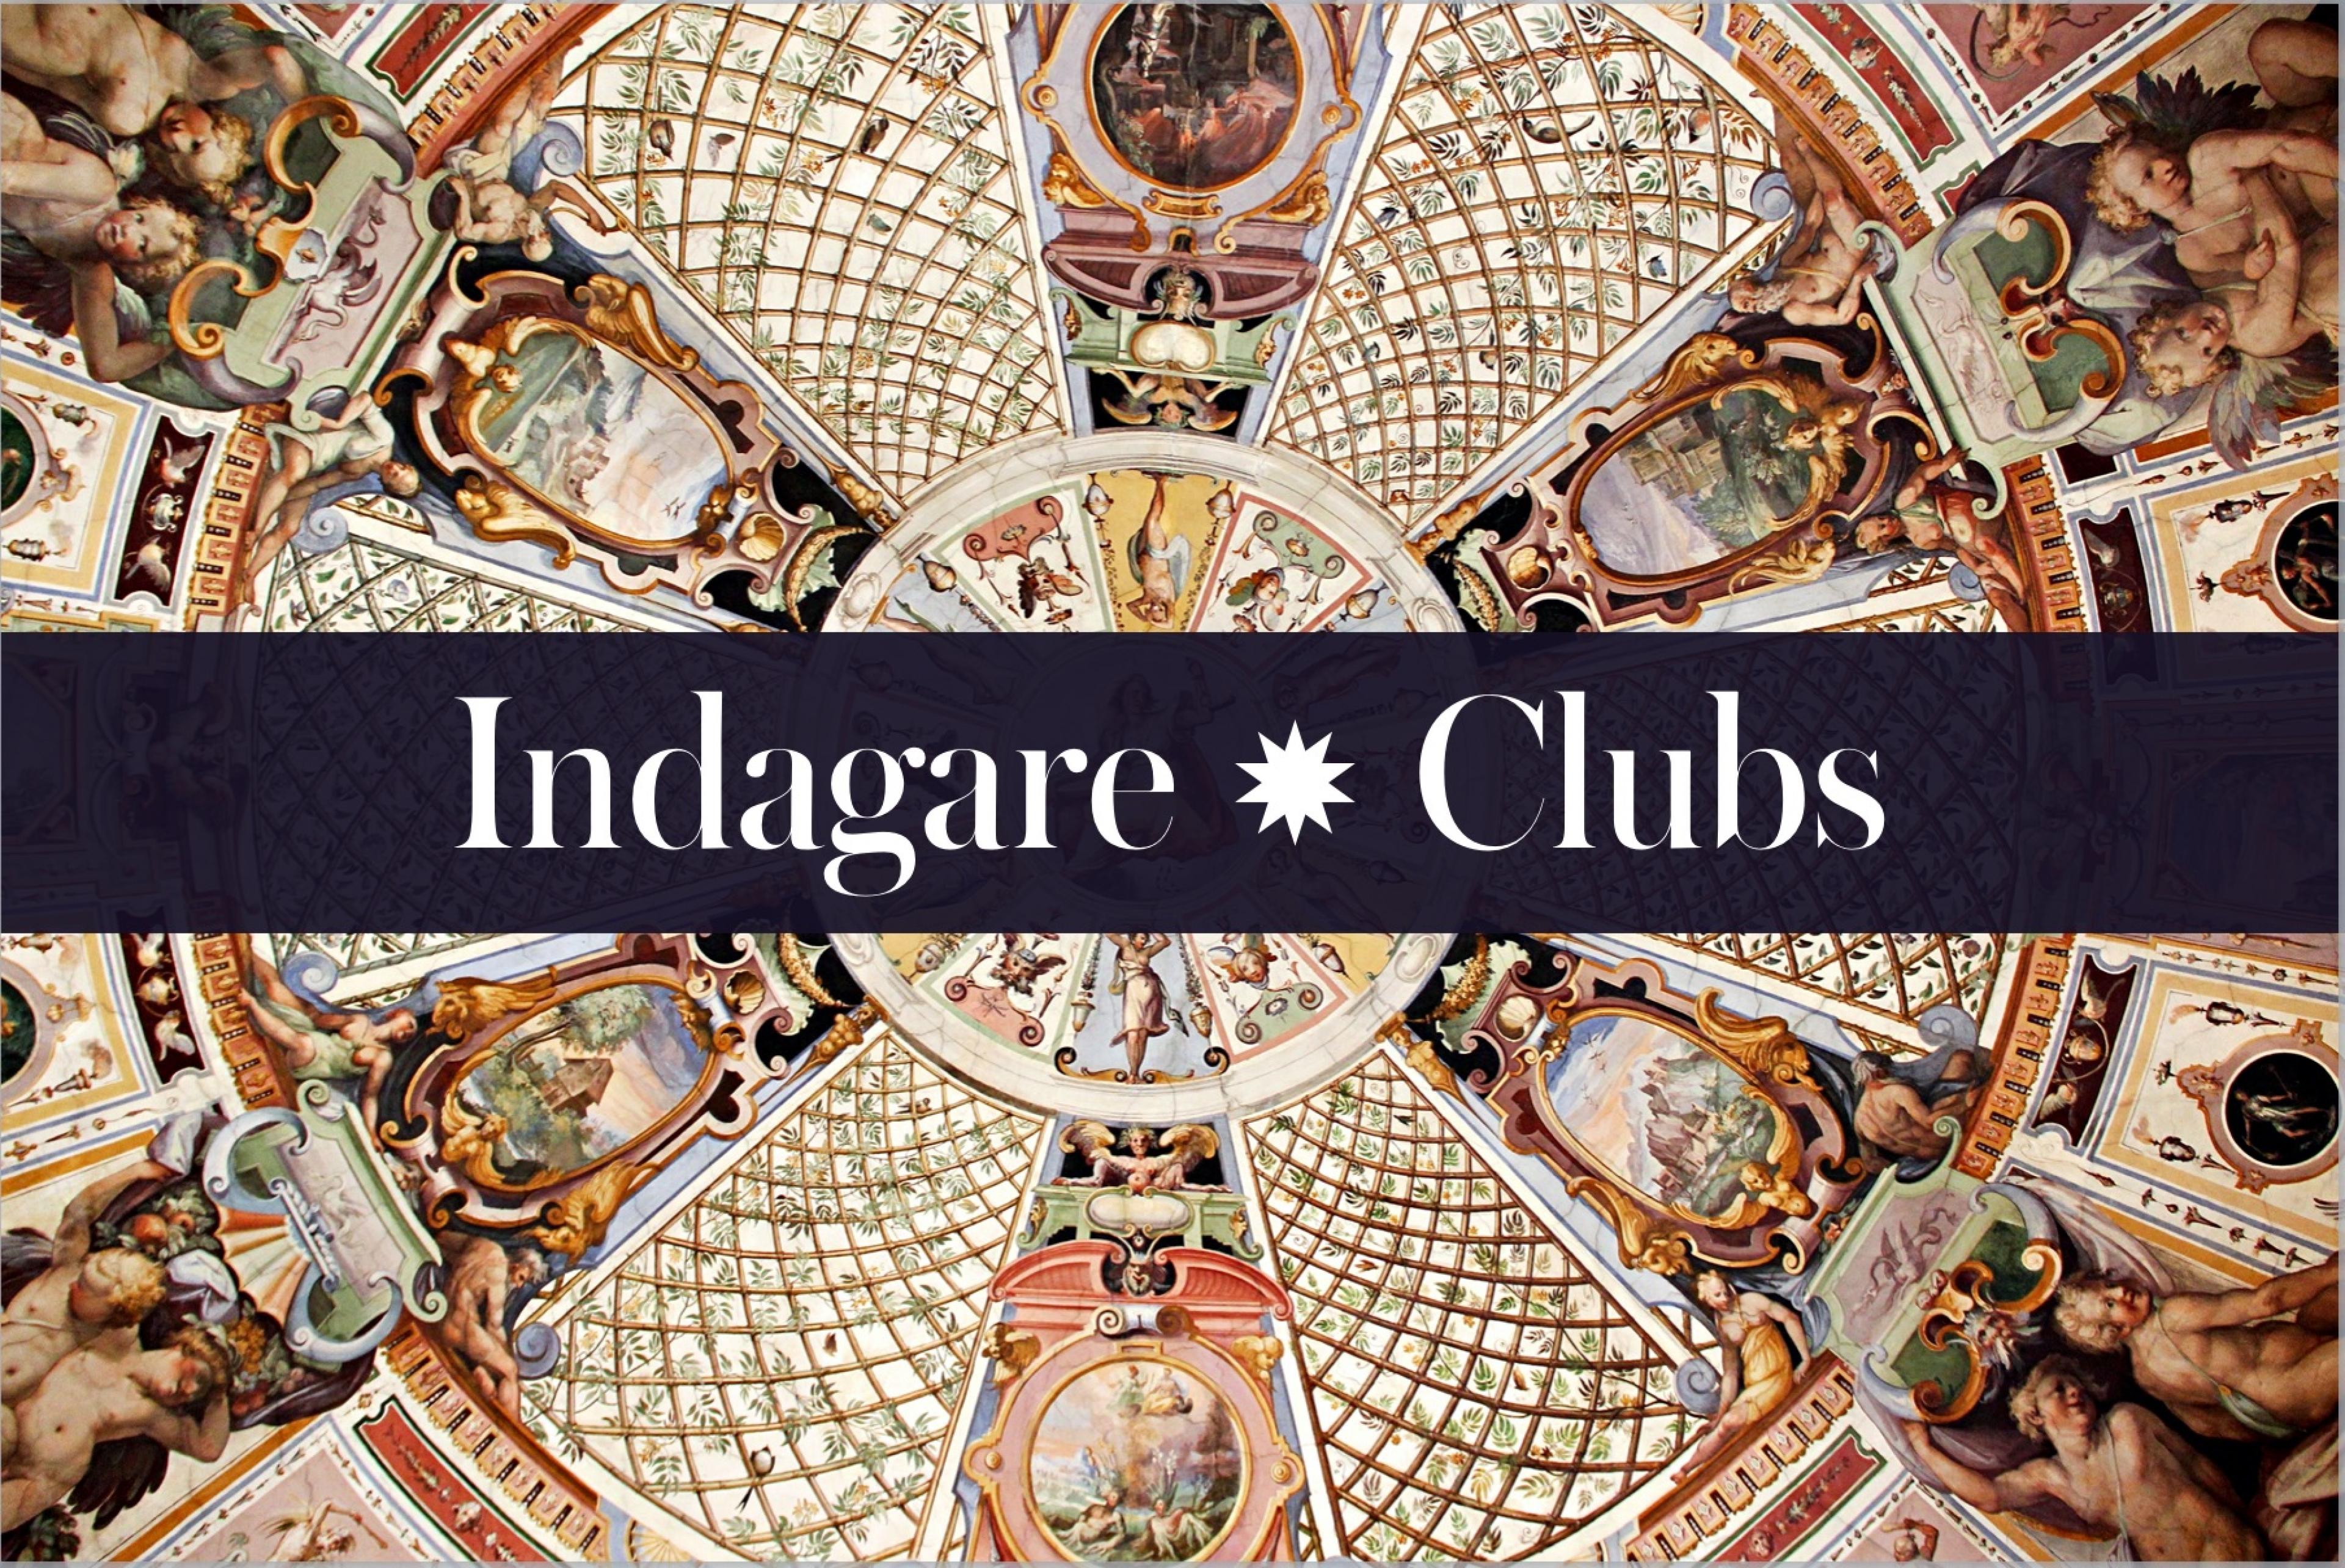 Image indagare-clubs.jpg